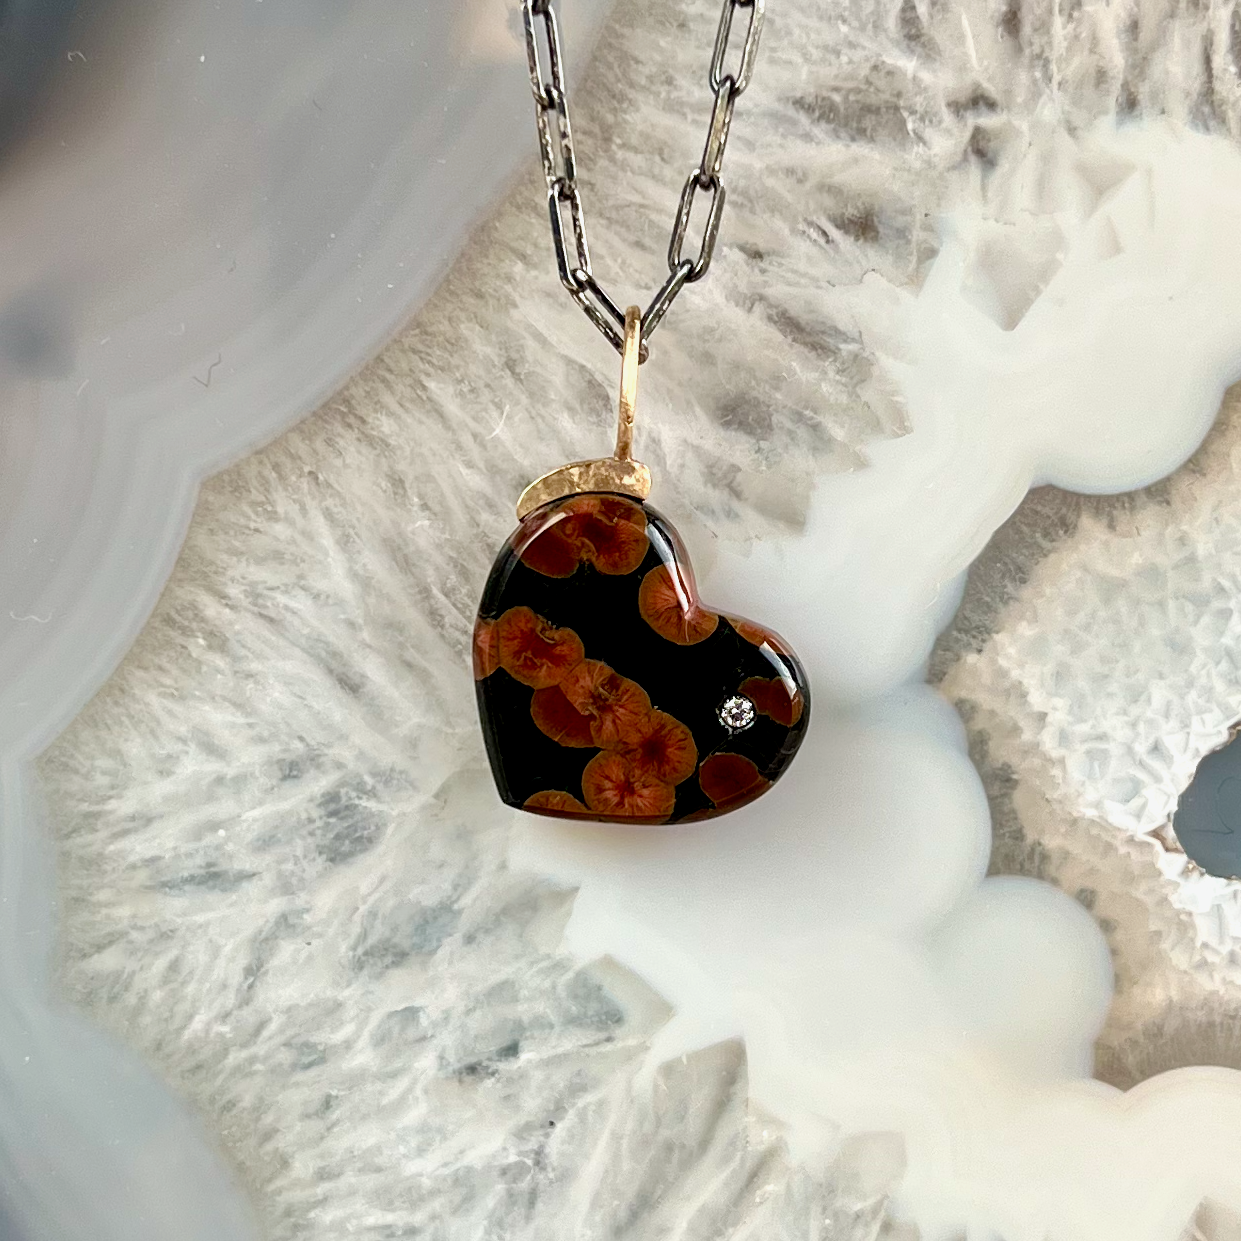 LOUIS VUITTON Agate Necklace Jewelry